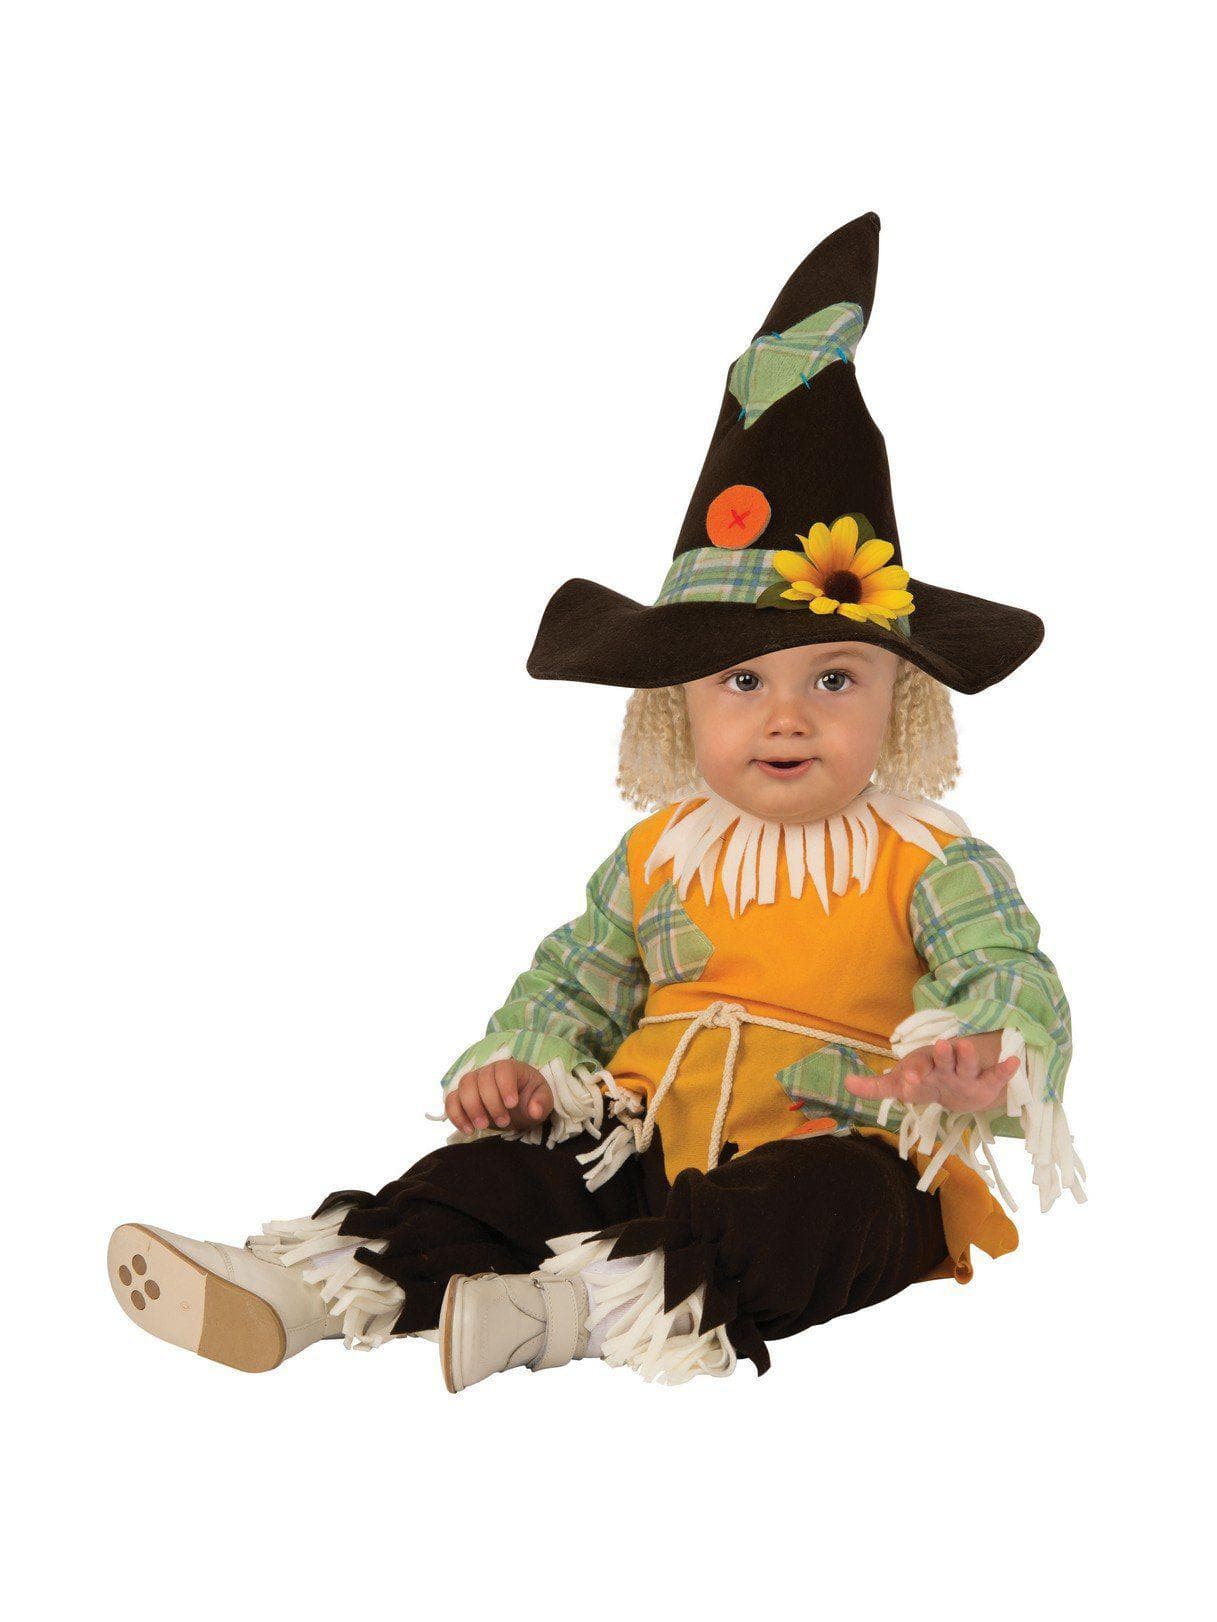 Baby/Toddler Scarecrow Costume - costumes.com